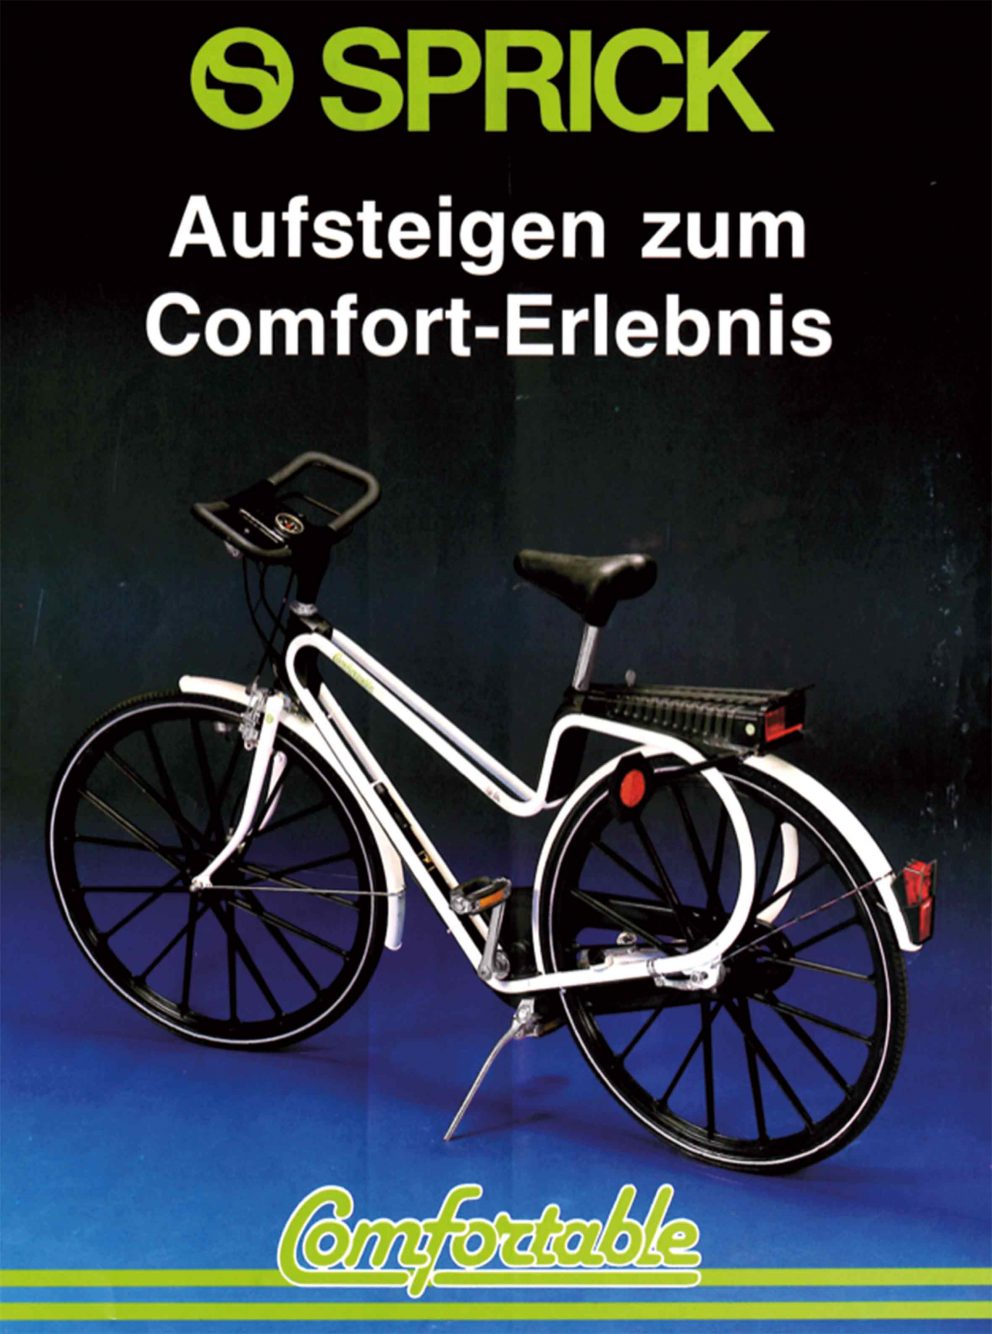 The advertisement of the sprick comfortable by odo klose